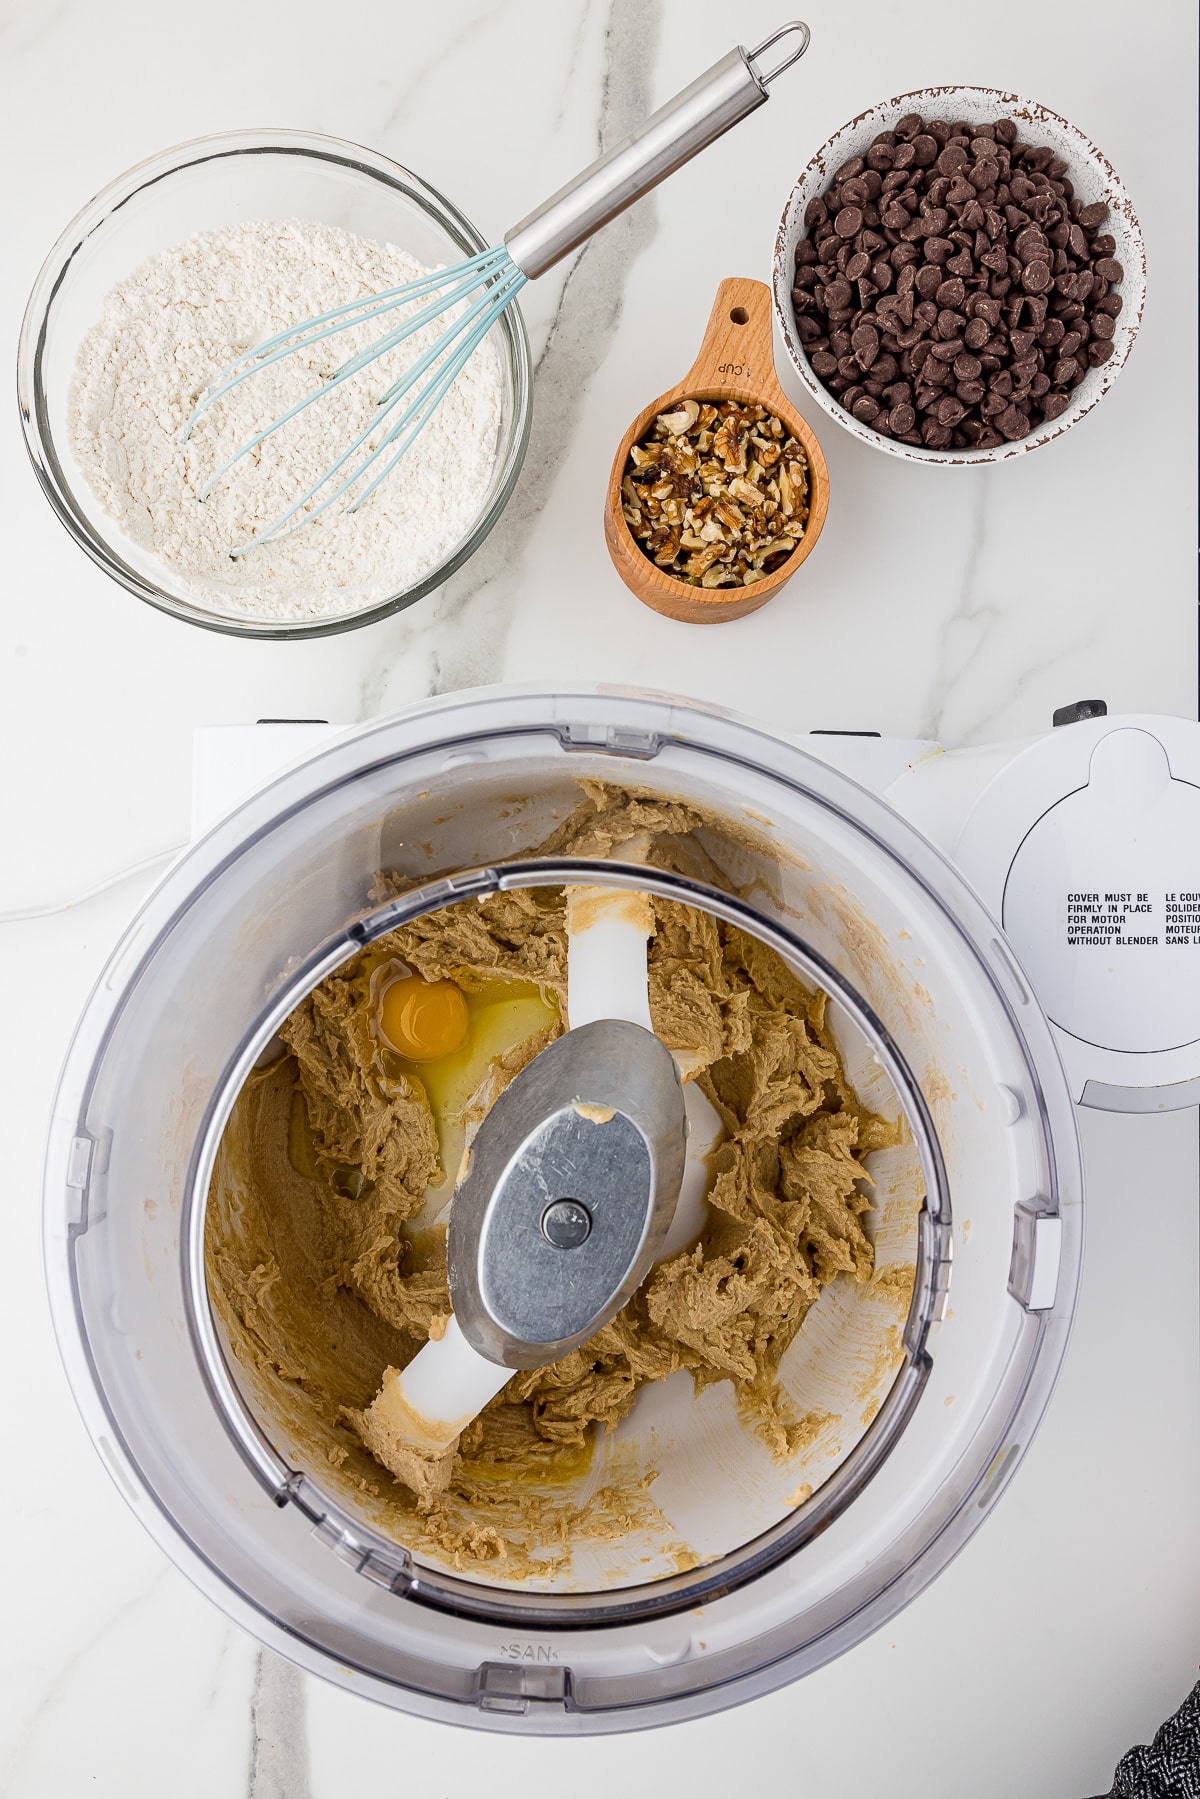 Bosch mixer with cookie dough on a white marble countertop with chocolate chips, walnuts and flour in bowls in the background